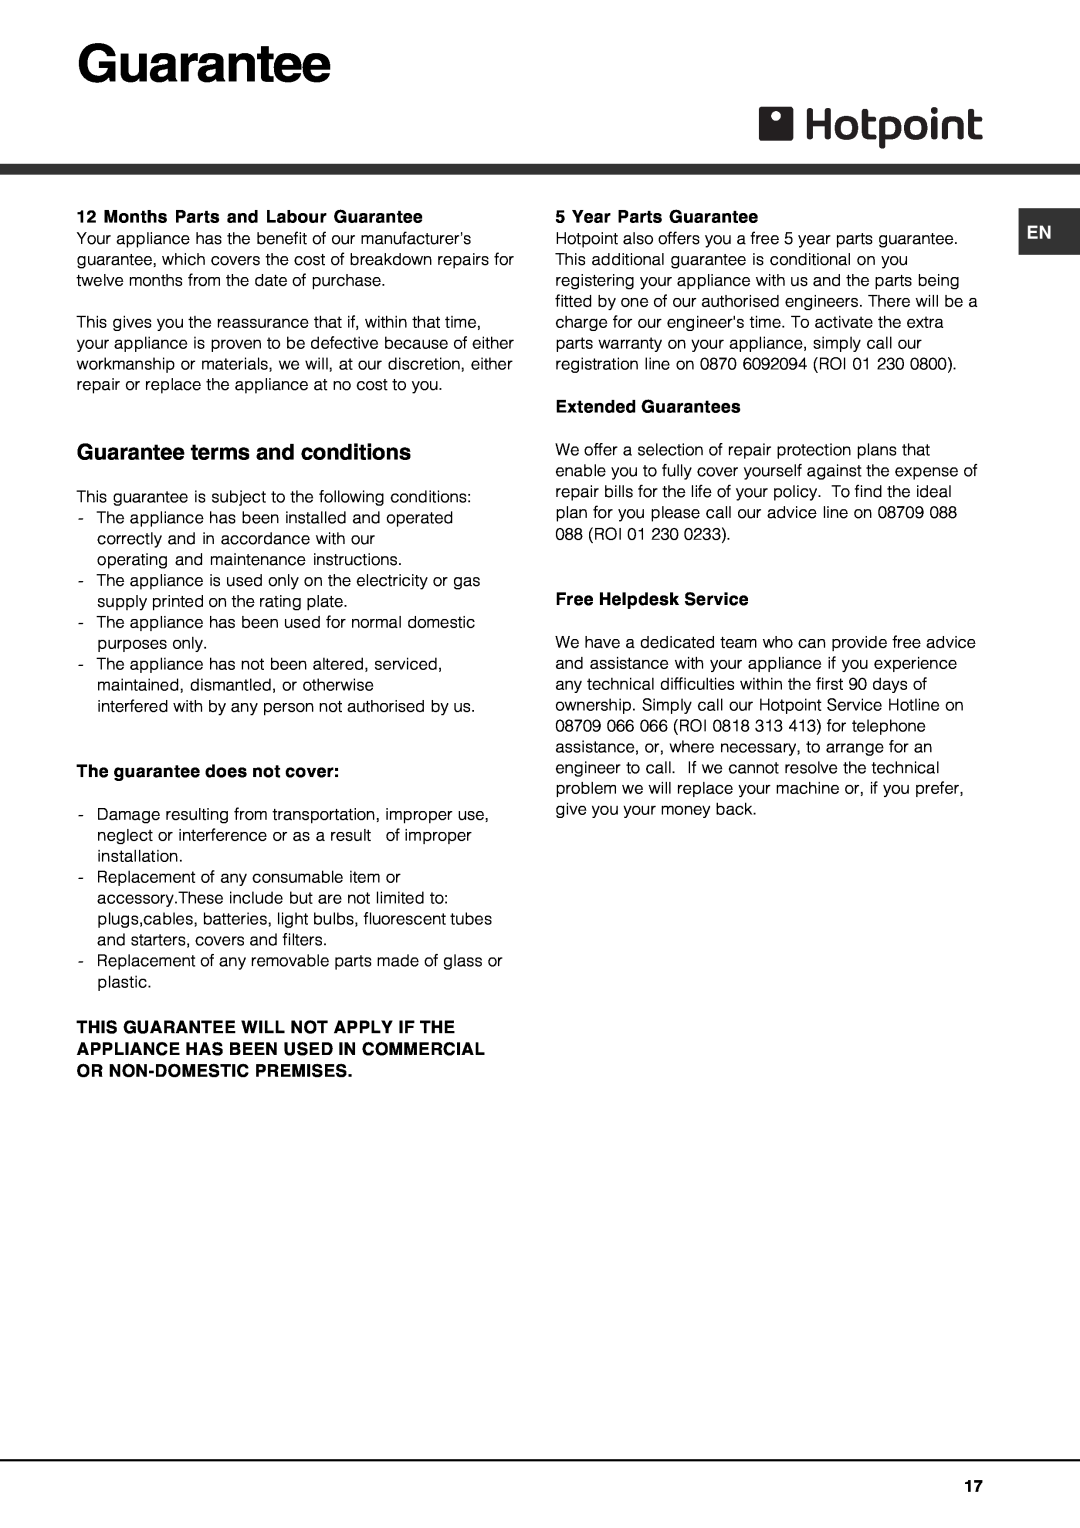 Hotpoint FDF 784 manual Guarantee terms and conditions 